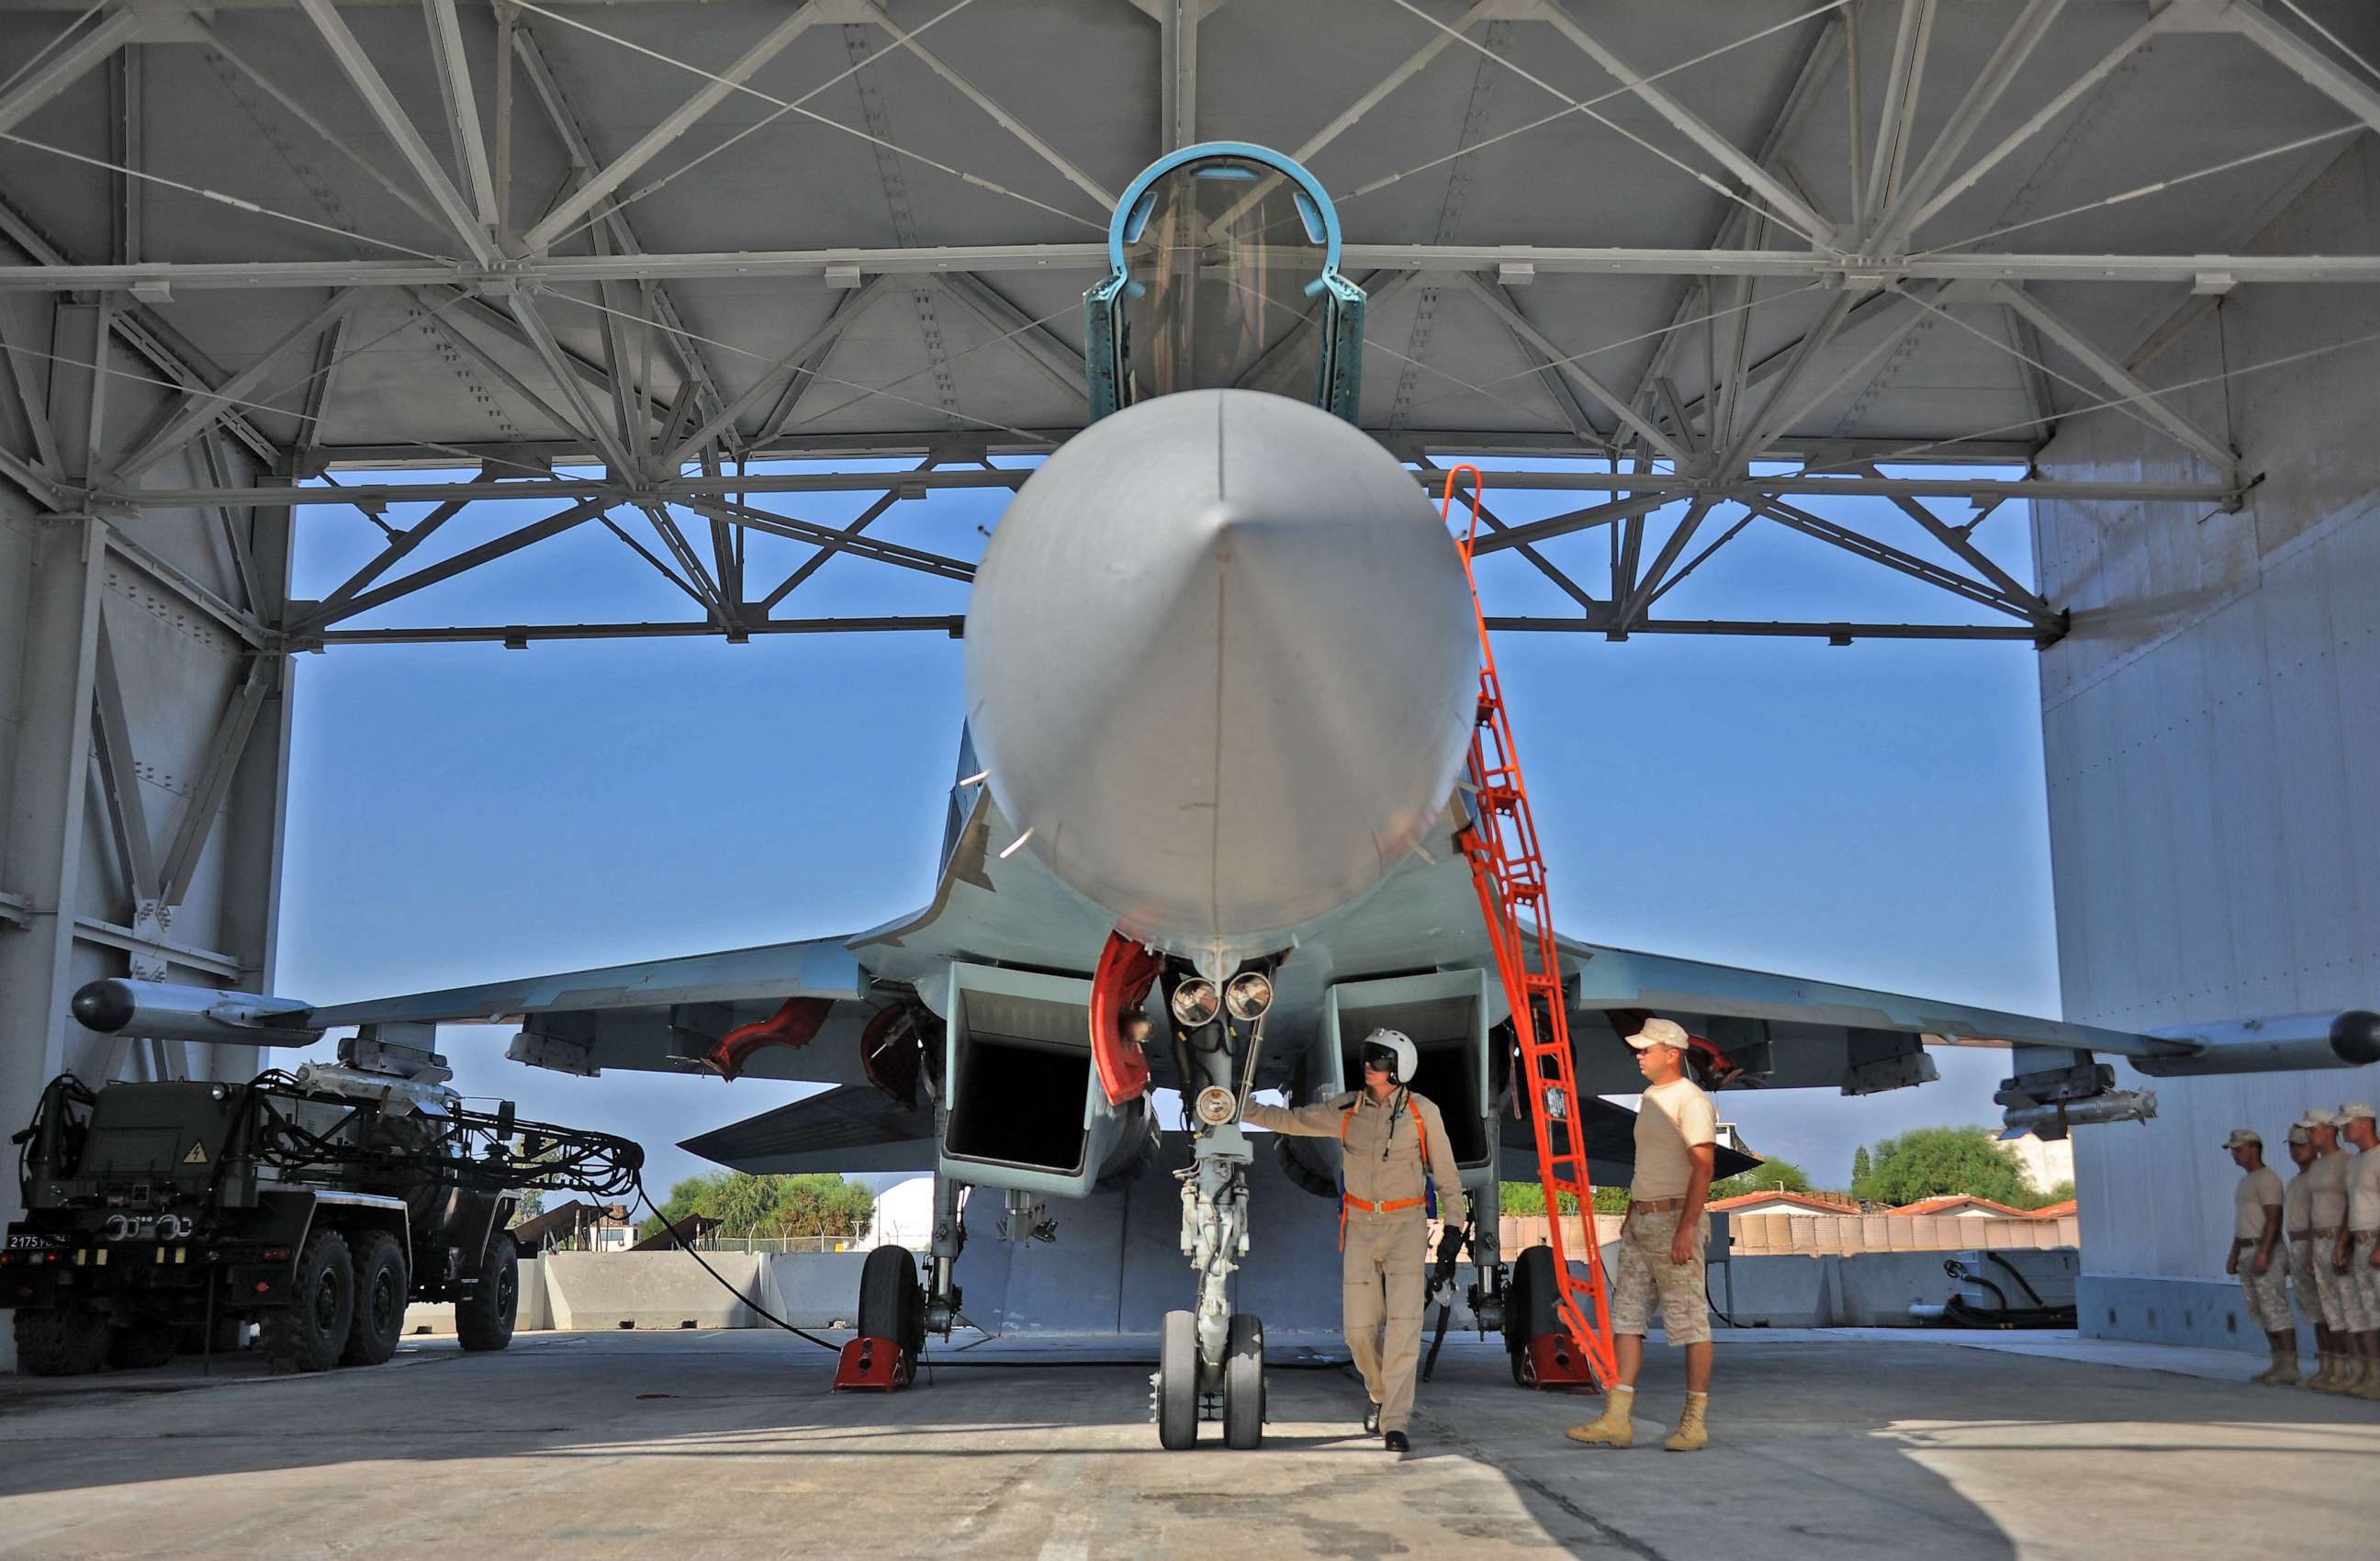 PHOTO: In this file photo taken on September 26, 2019, a Russian air force Sukhoi Su-35 fighter jet is prepared for take off at the Russian military base of Hmeimim, in Syria's Latakia governorate.